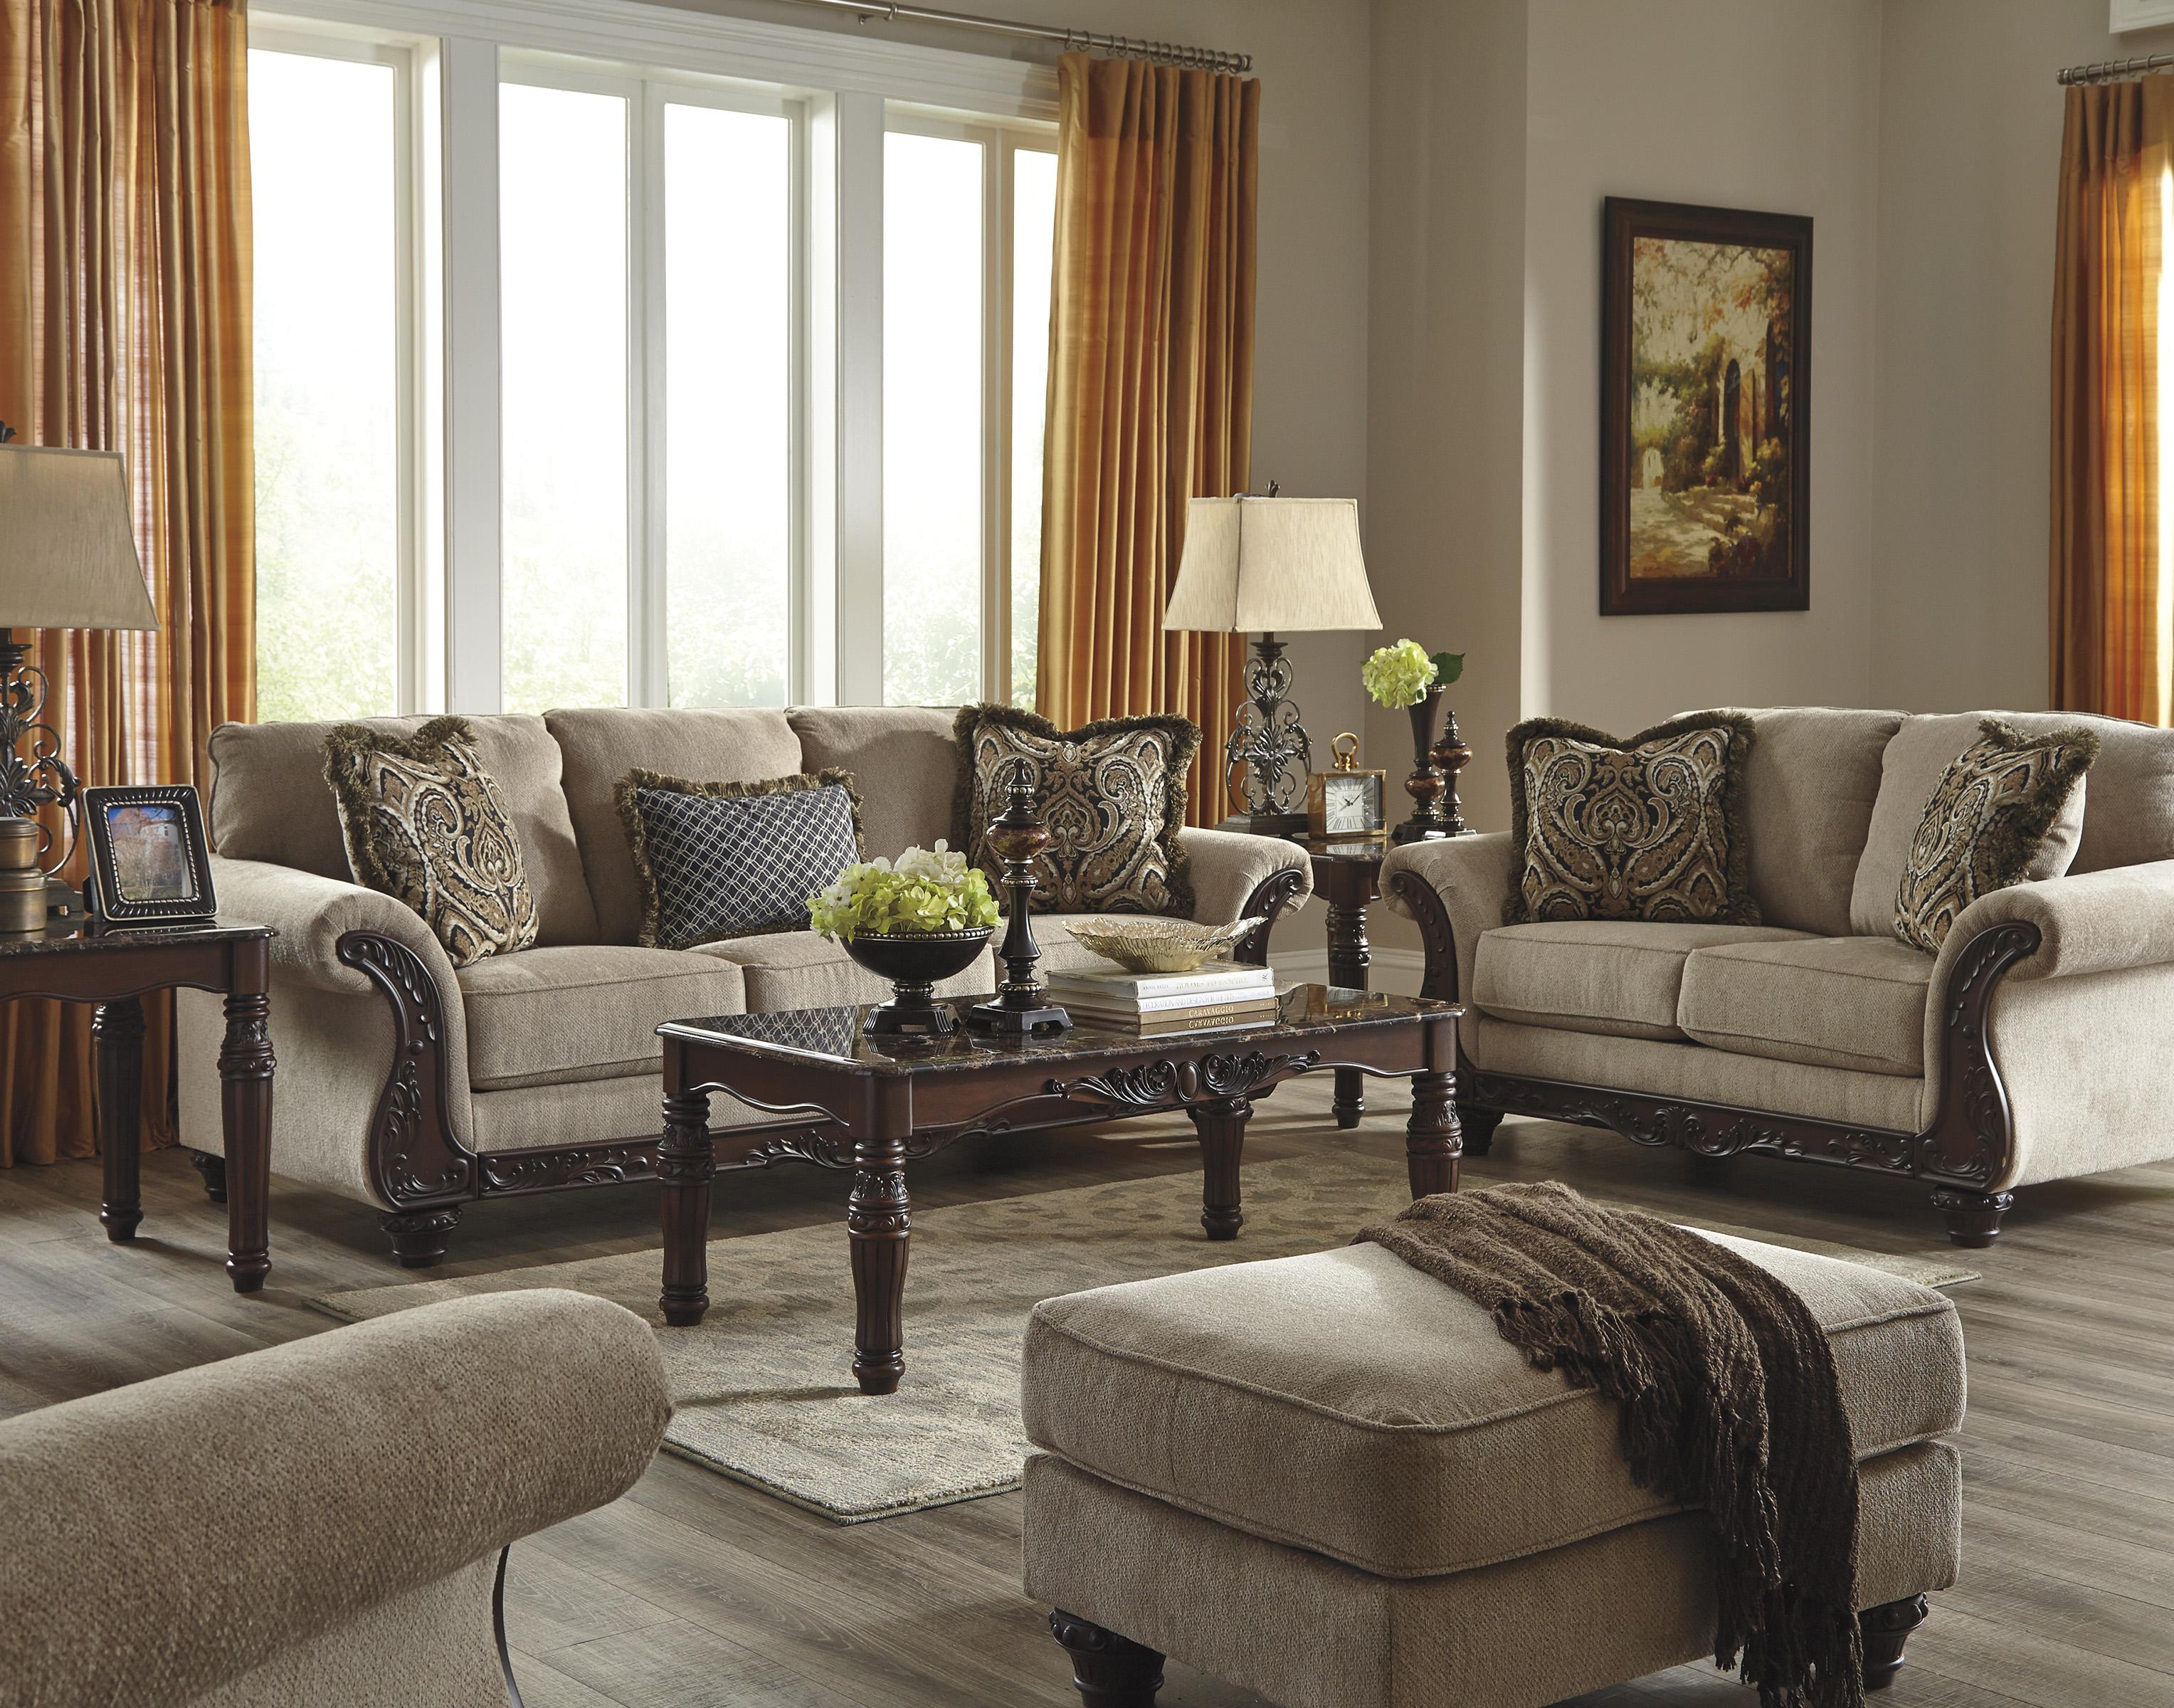 

    
Ashley Laytonsville 4 Piece Living Room Set in Pebble
